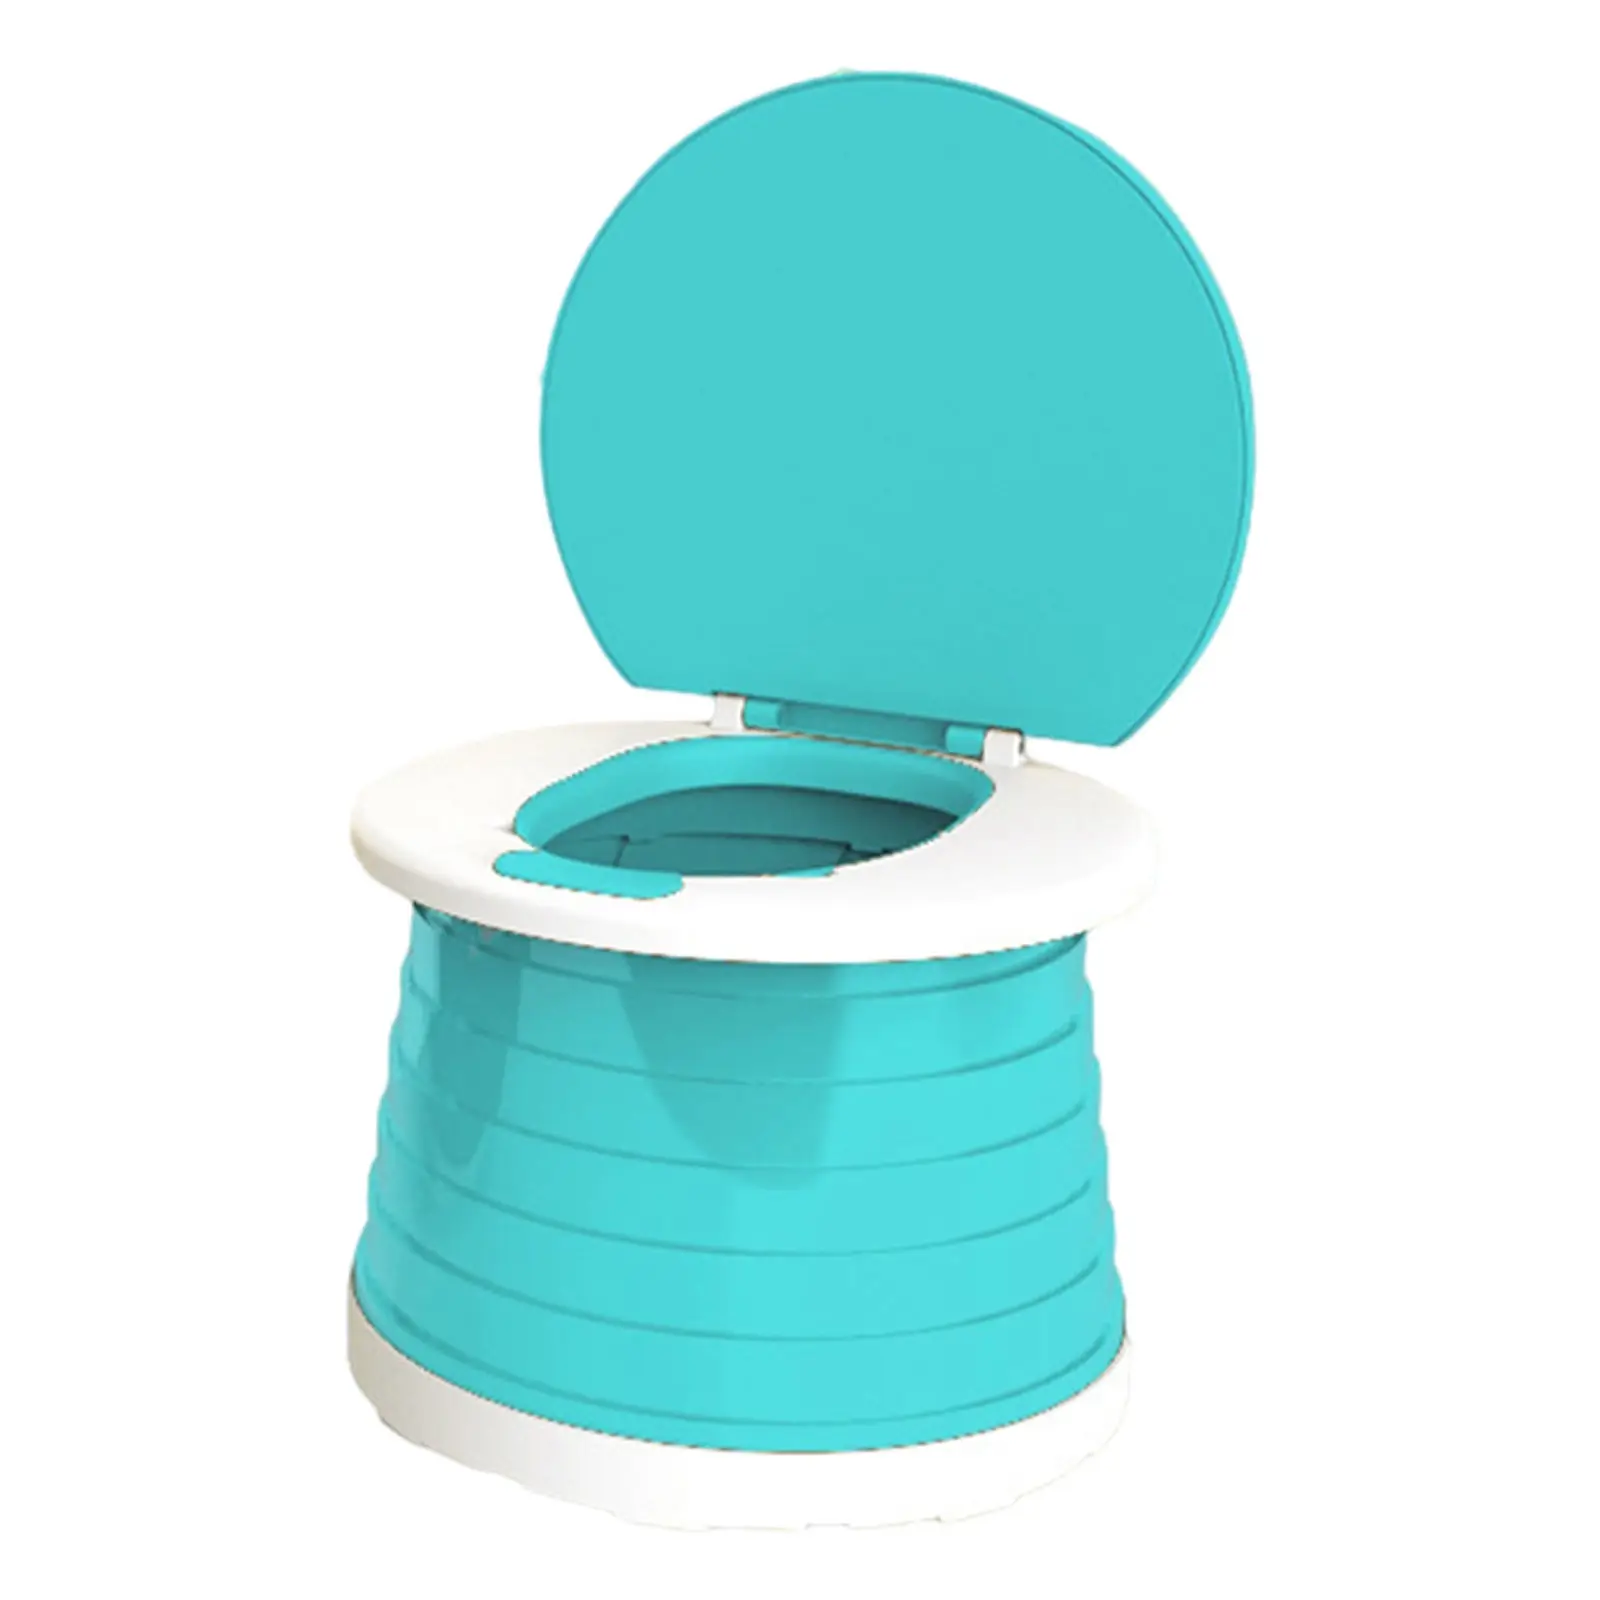 Portable Travel Children Collapsible Toilet Seat Kids Potty, Compact Lightweight